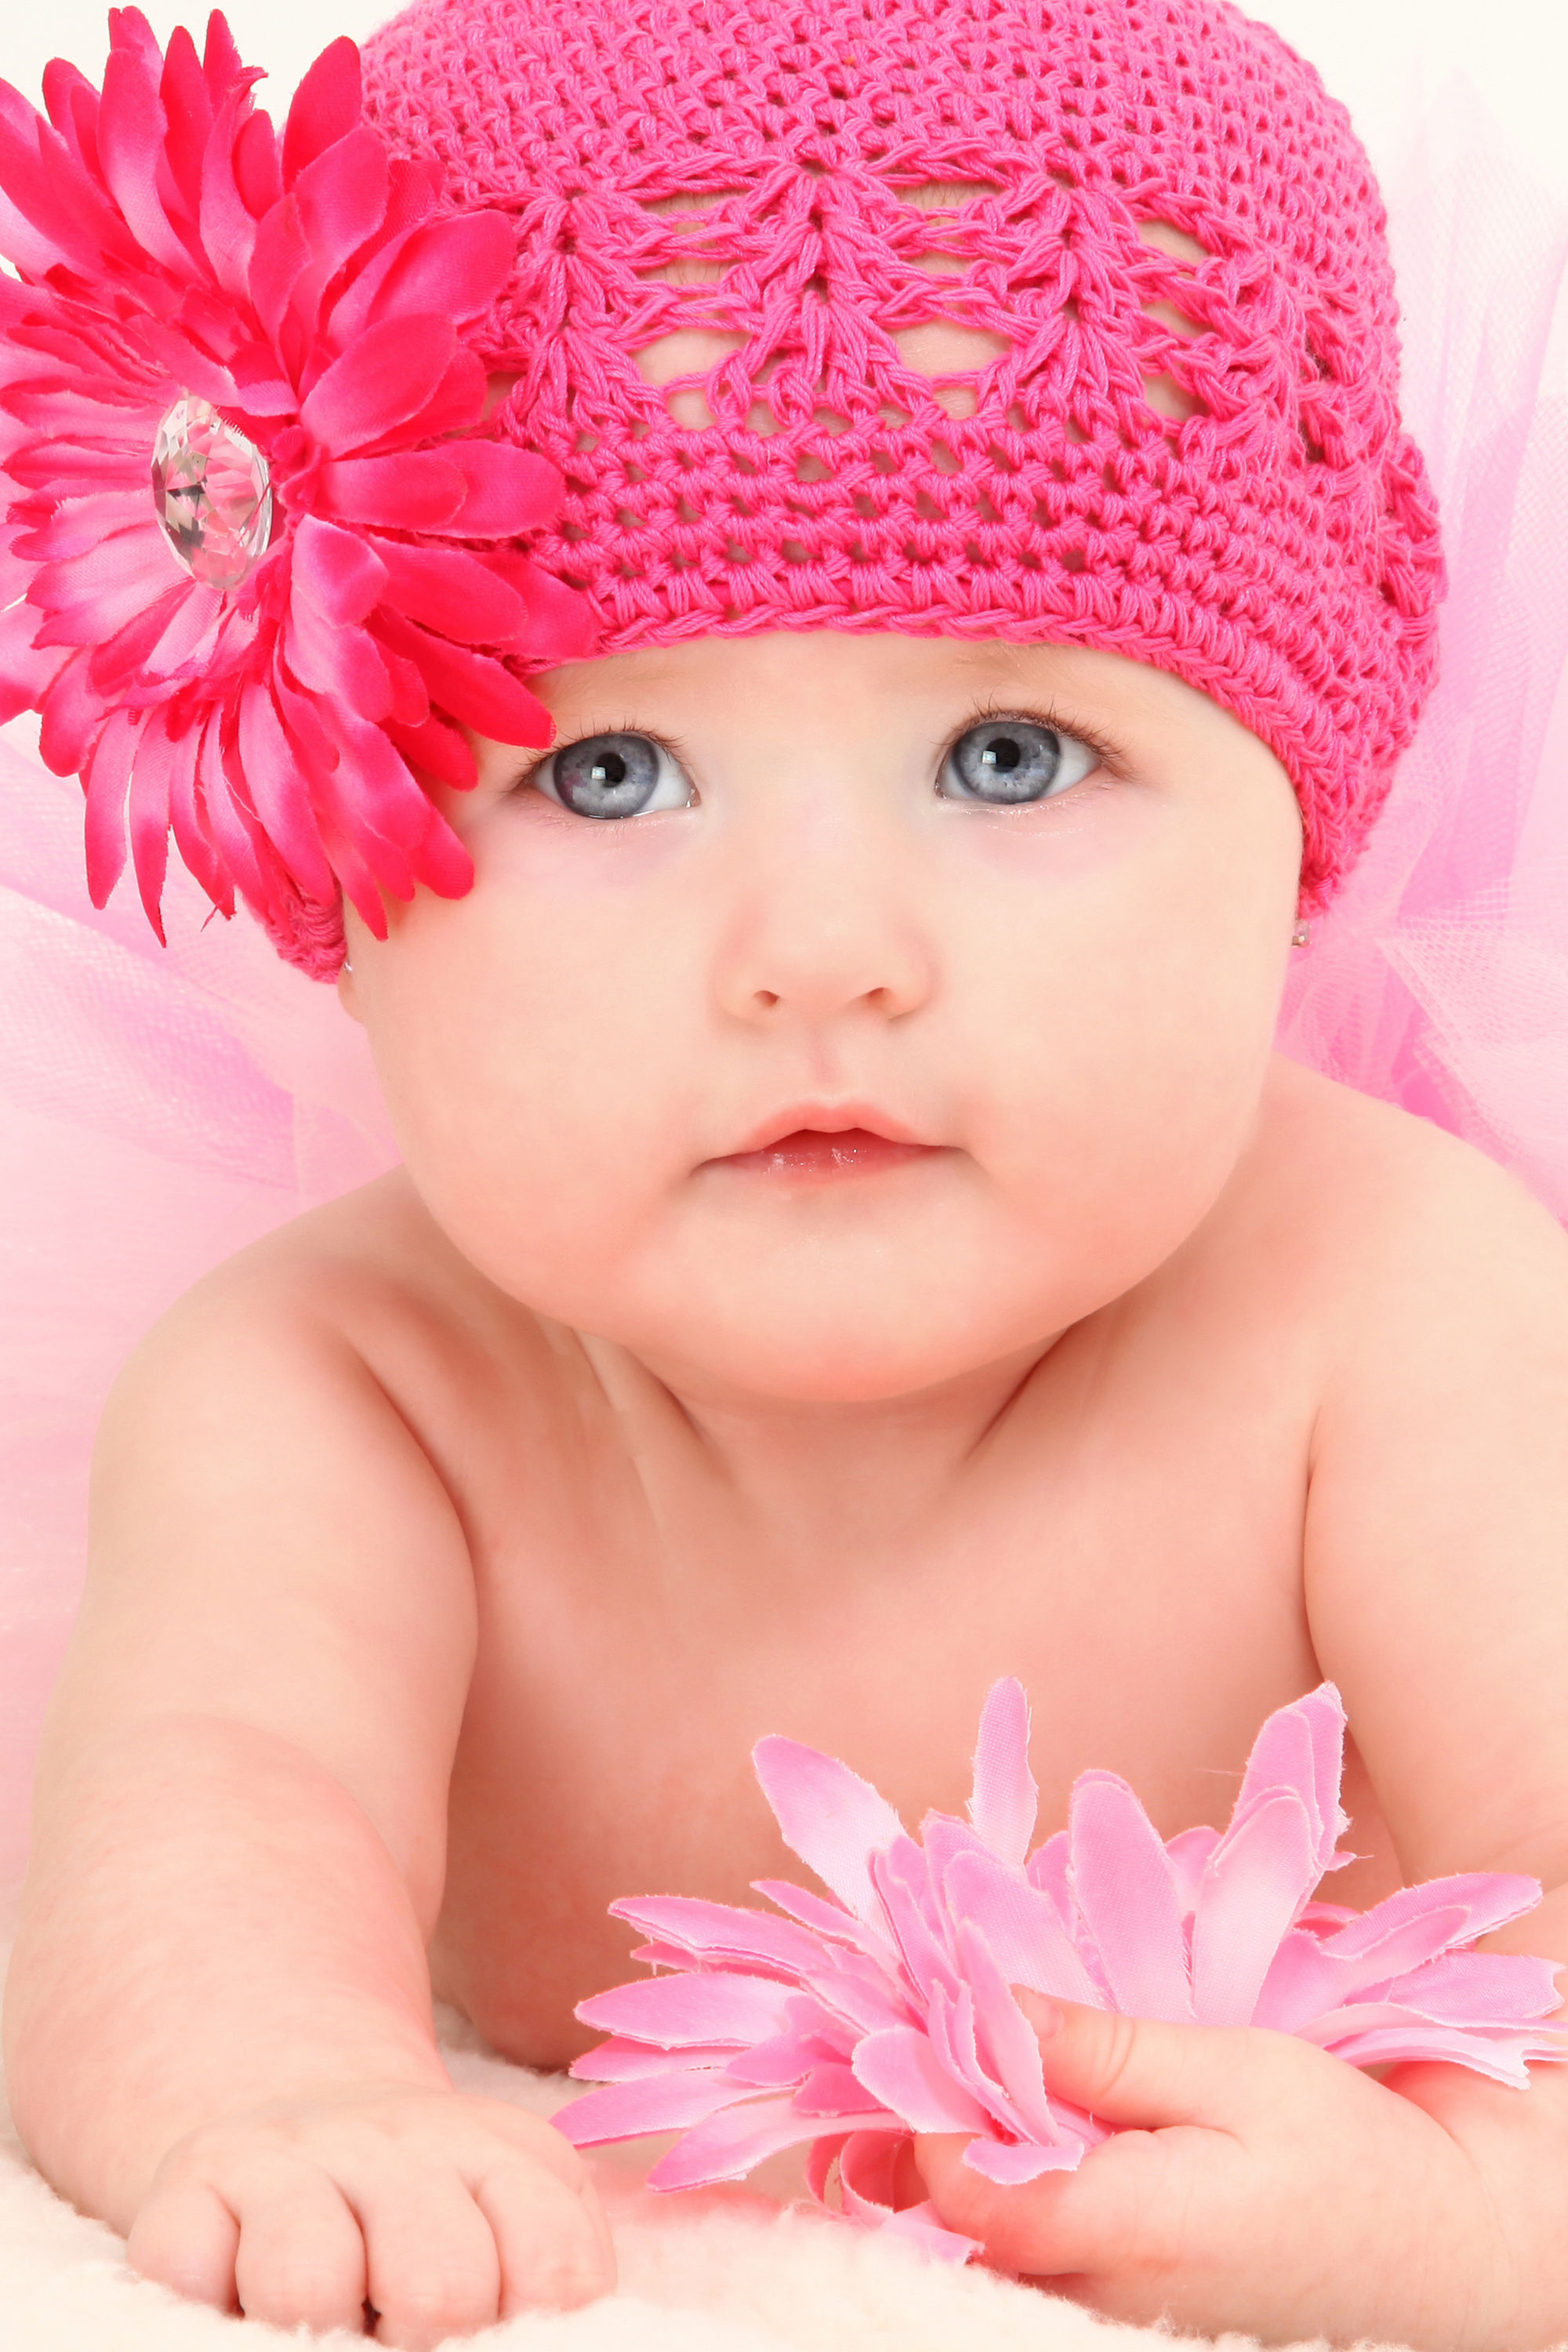 Wallpapers Collection Â«cute Baby Wallpapersâ» Hd Wallpapers - Beautiful Cute Baby - HD Wallpaper 